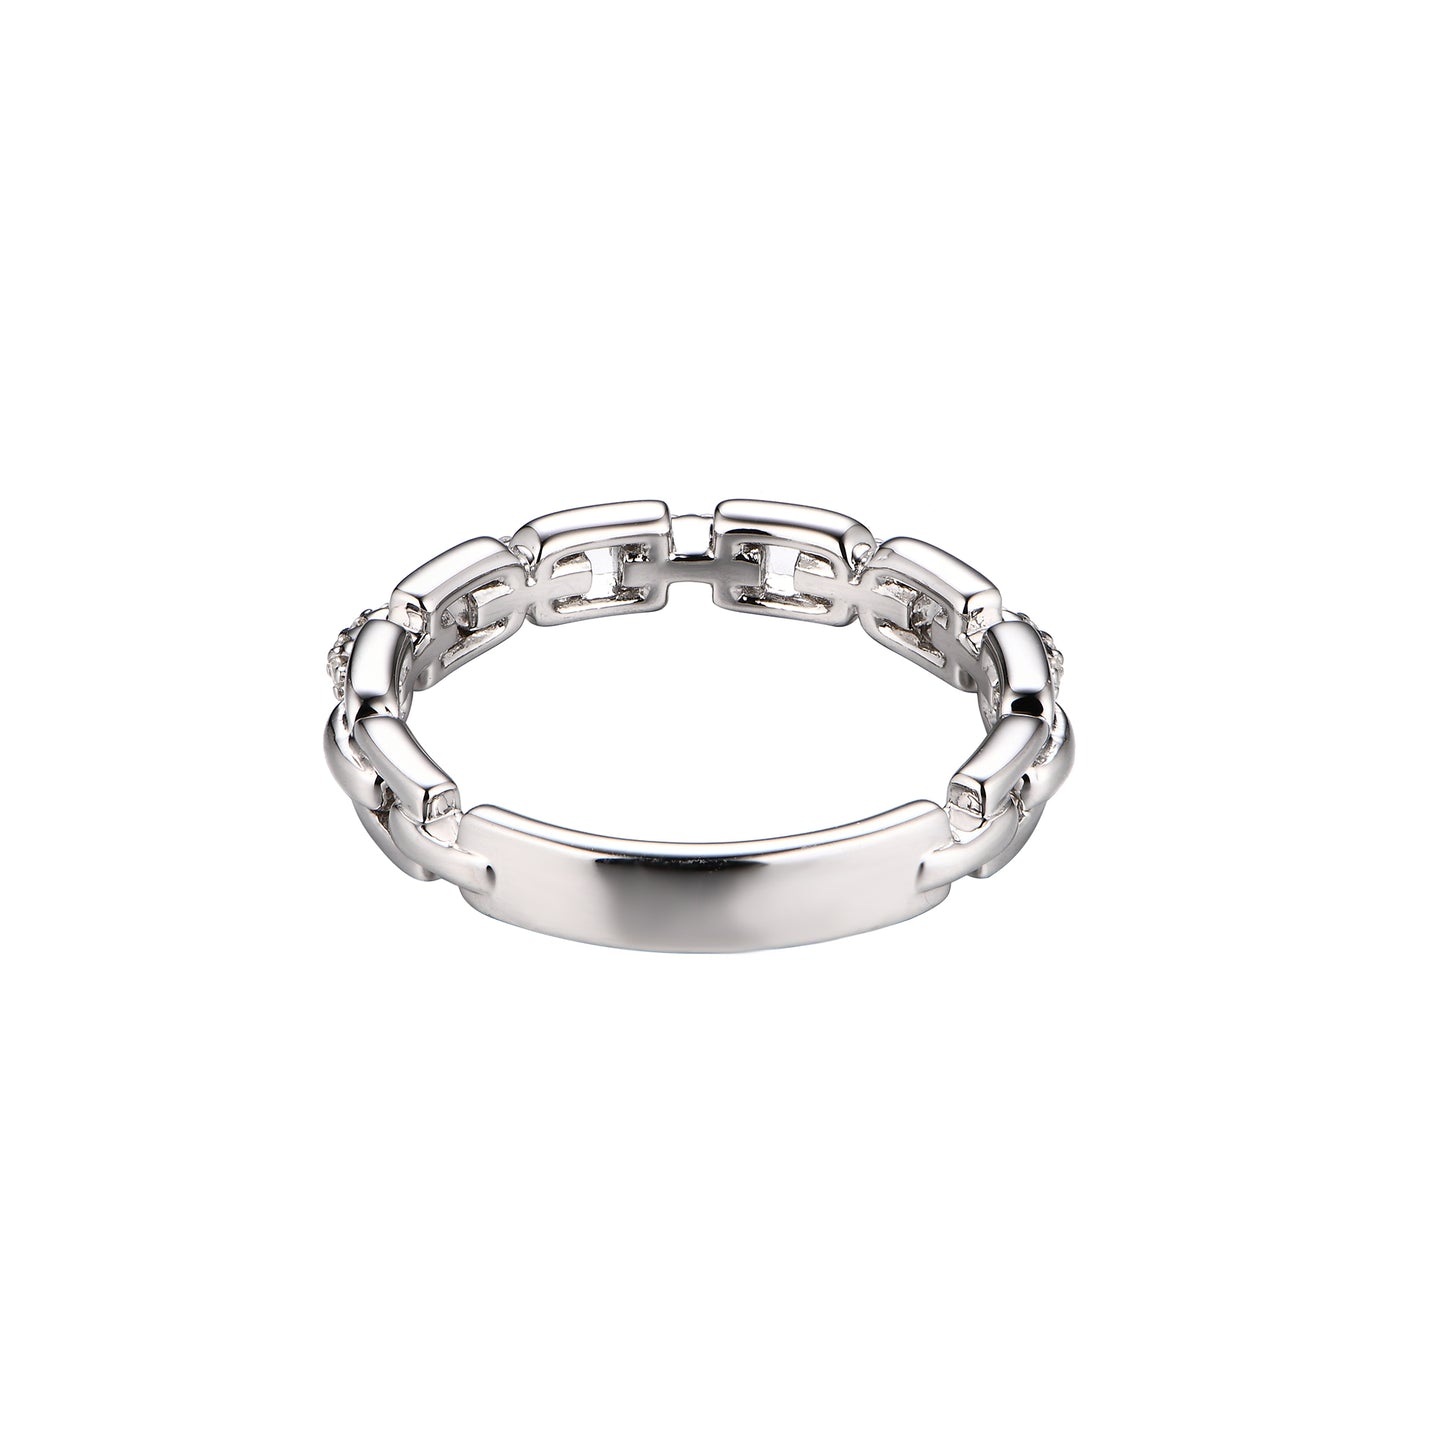 Elegant Chain-Link Inspired Band with Pave Set Accents